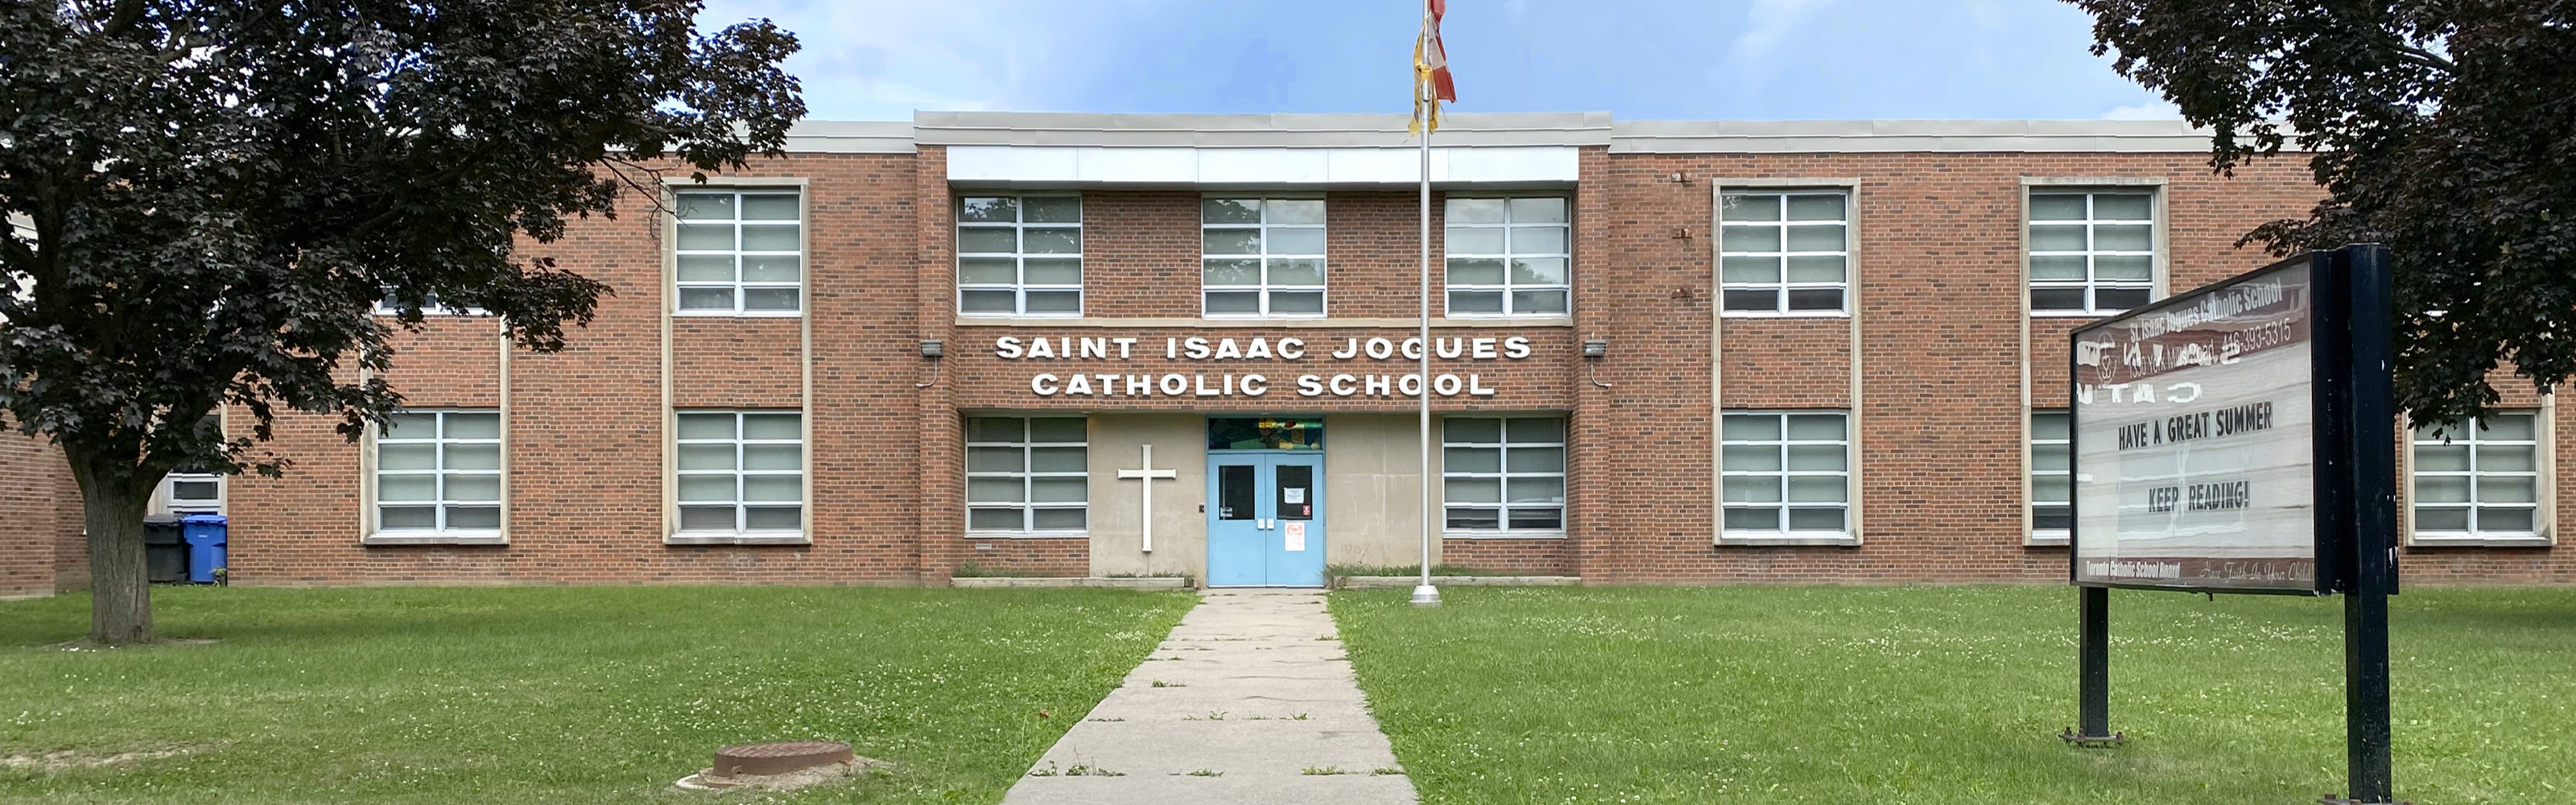 The front of the St. Isaac Jogues Catholic School building.